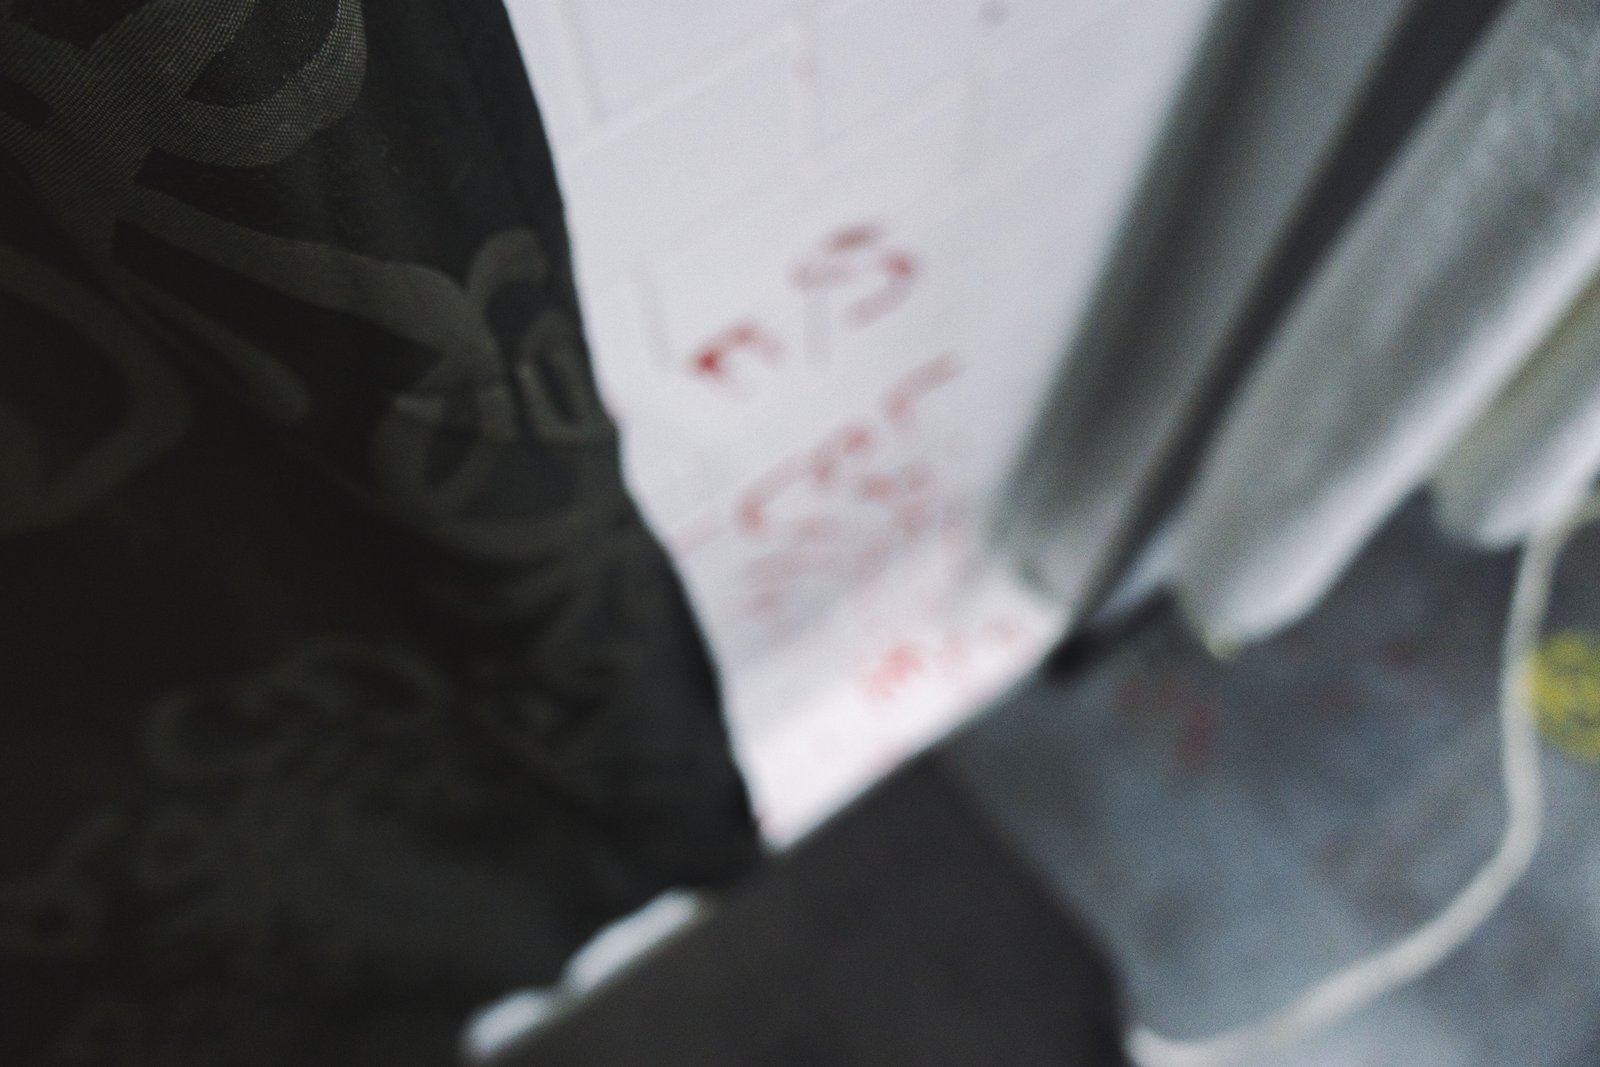 An image of the Crime Scene escape room at Escape This Frederick. The image is blurred with a shower and some red marks in the background.